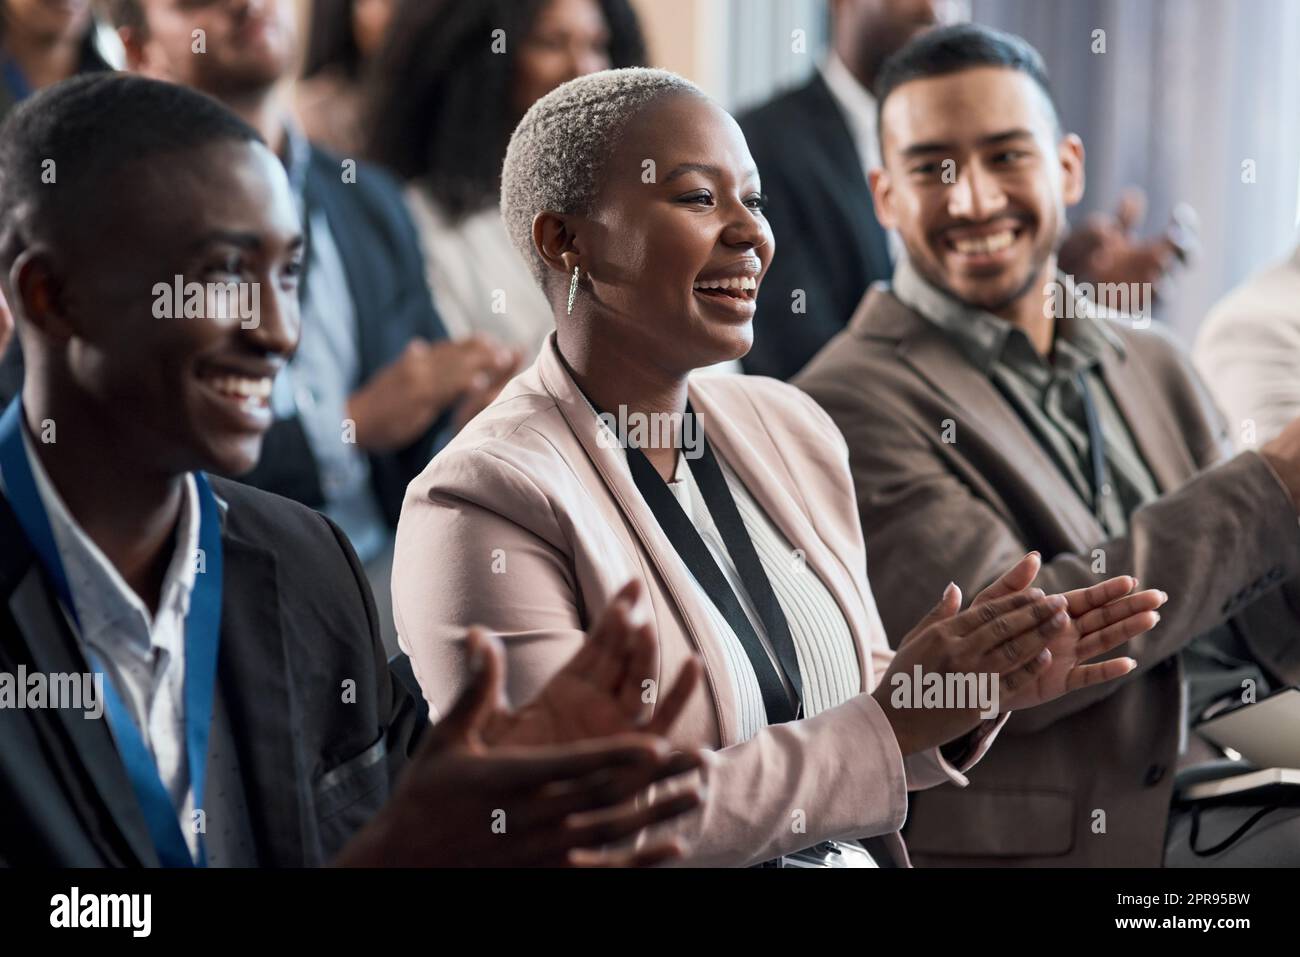 Represent your clique. a group of young businesspeople clapping during a conference in a modern office. Stock Photo